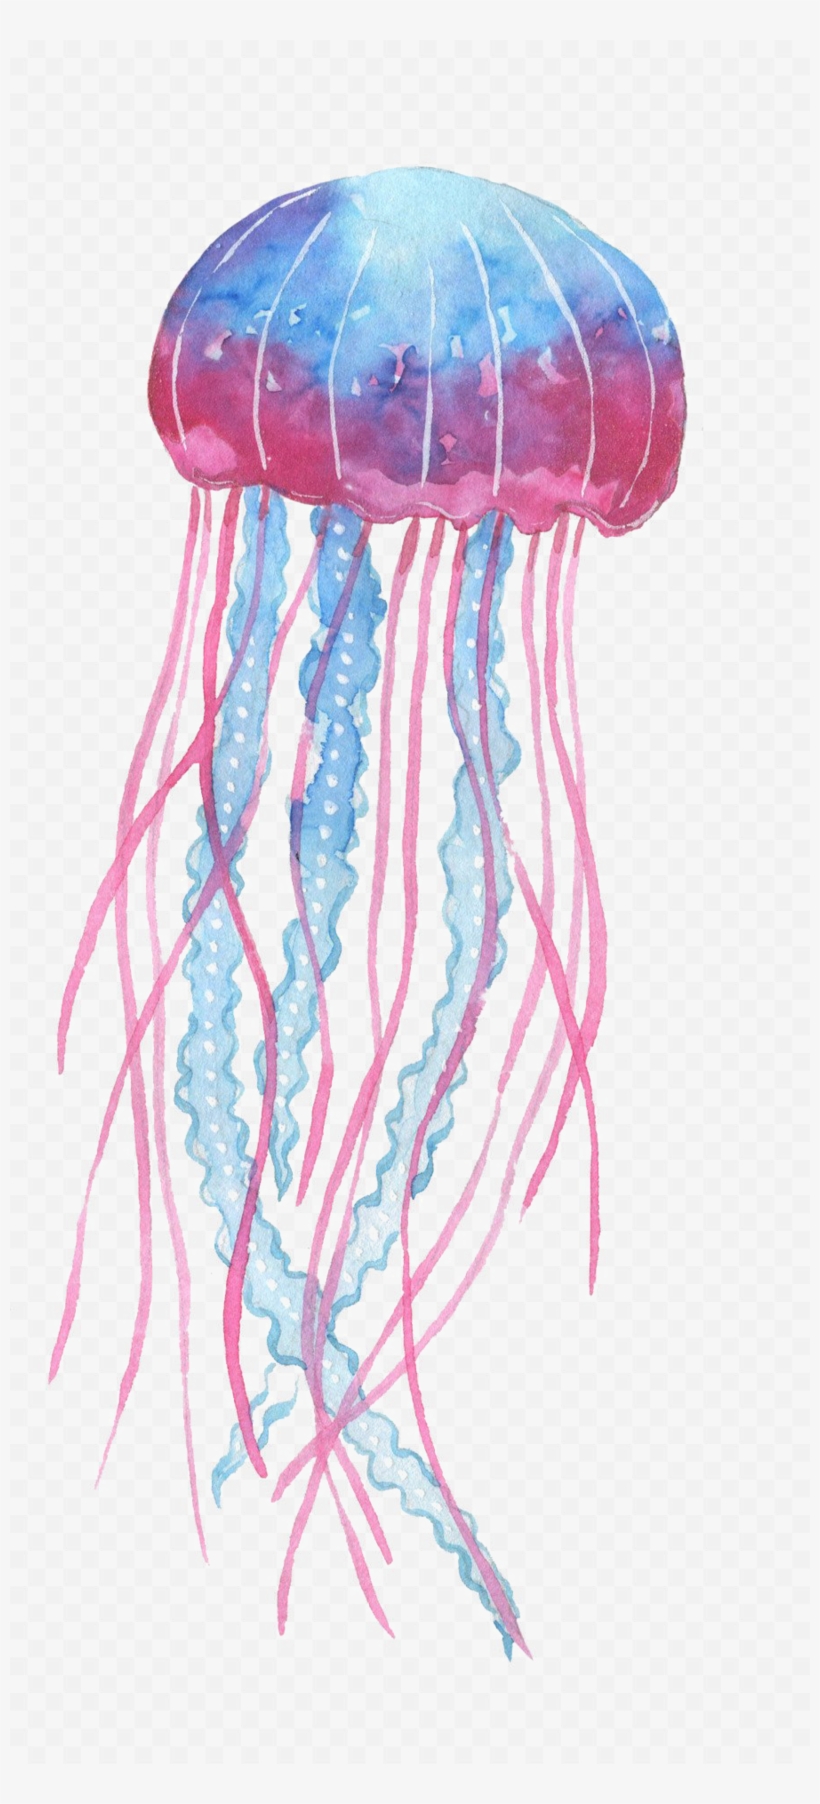 Box Jellyfish Png Transparent Image - Jelly Fish Png, transparent png #4782186